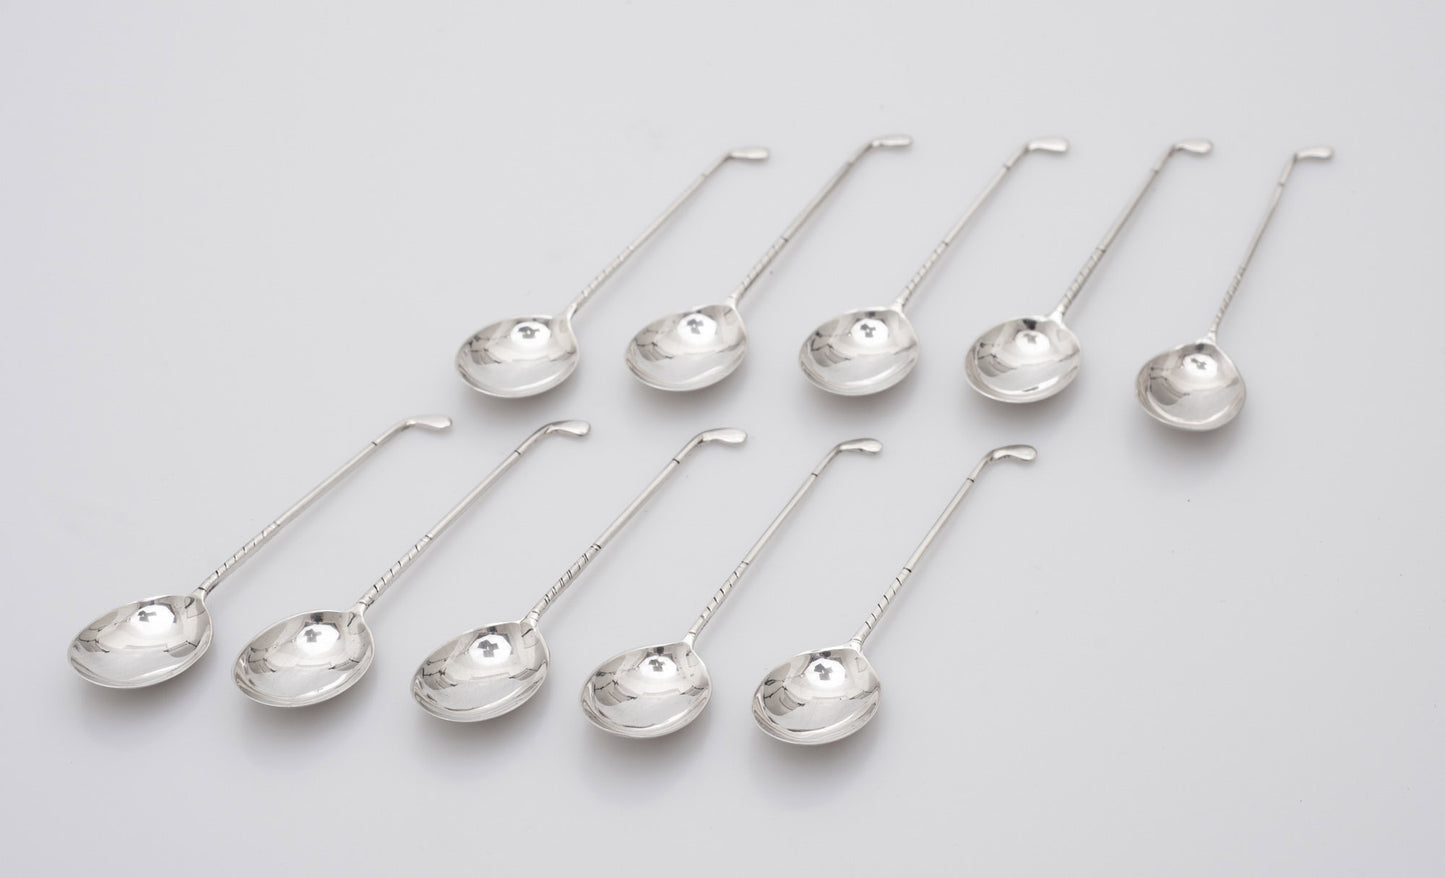 Set 10 Vintage Sterling Silver Coffee Spoons with Golf Club Golfing Handles (Code 2508)